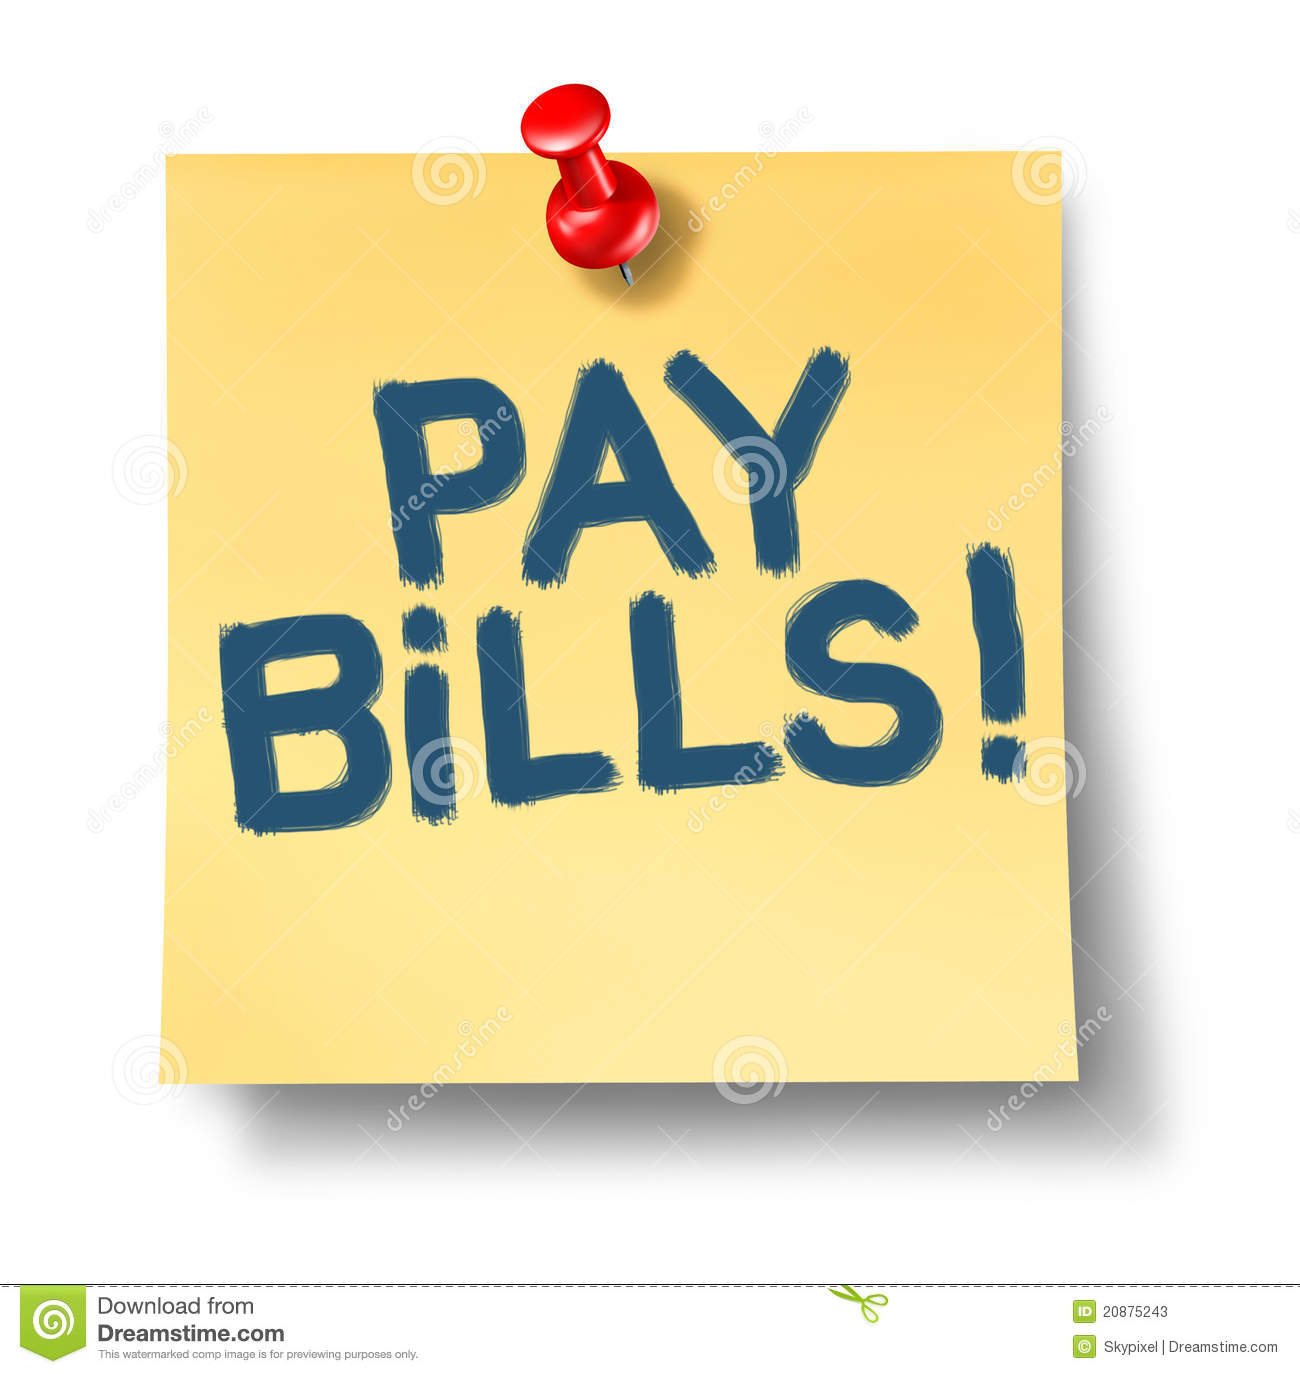 Paying Bills Office Note Reminder Rewpresenting The Concept Of